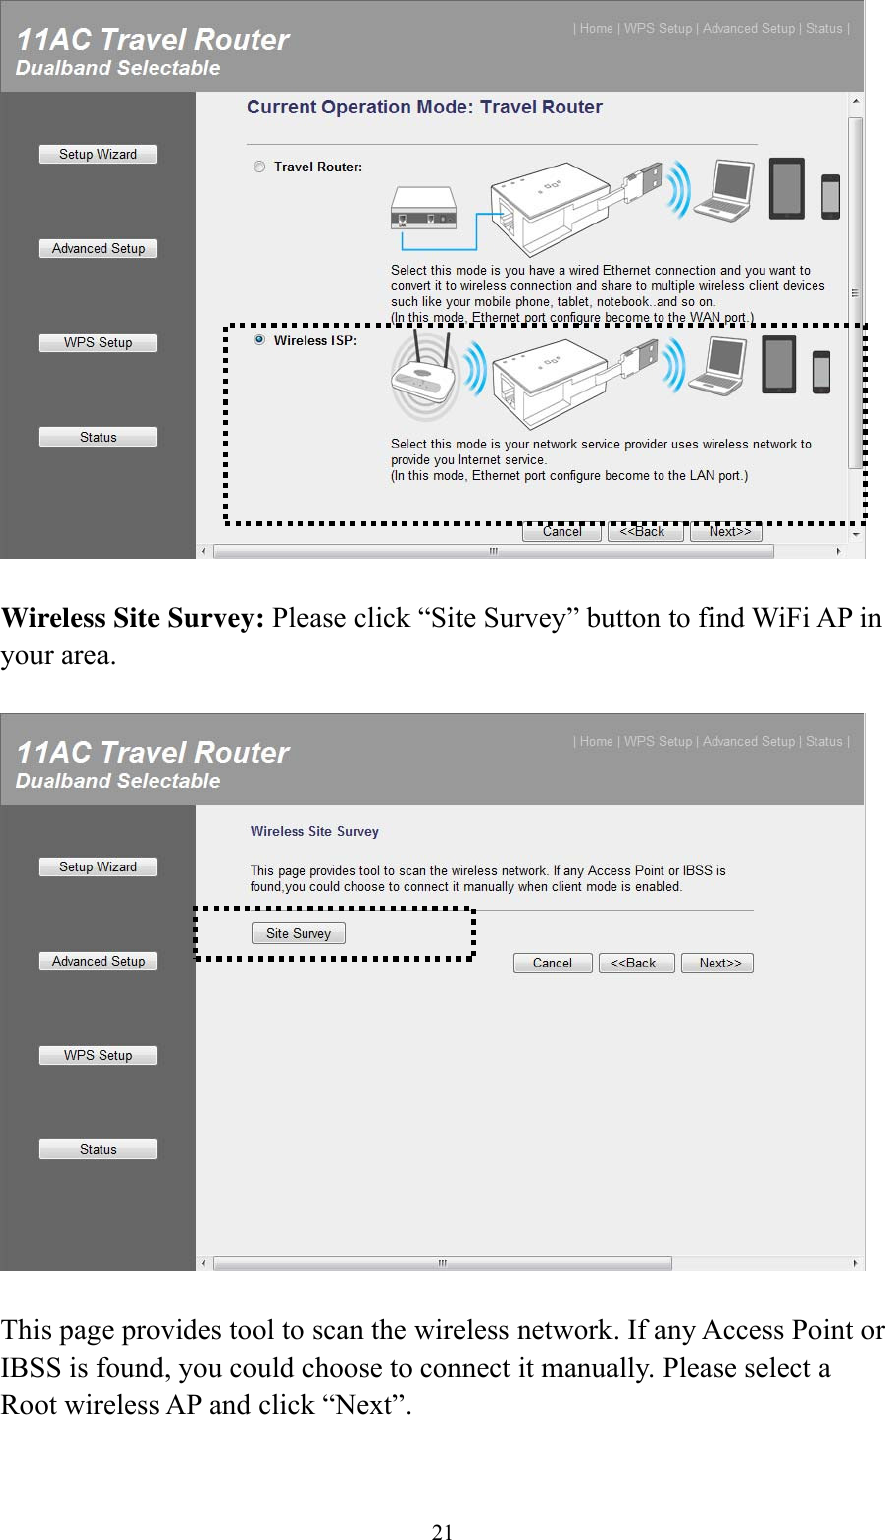 21   Wireless Site Survey: Please click “Site Survey” button to find WiFi AP in your area.    This page provides tool to scan the wireless network. If any Access Point or IBSS is found, you could choose to connect it manually. Please select a Root wireless AP and click “Next”. 